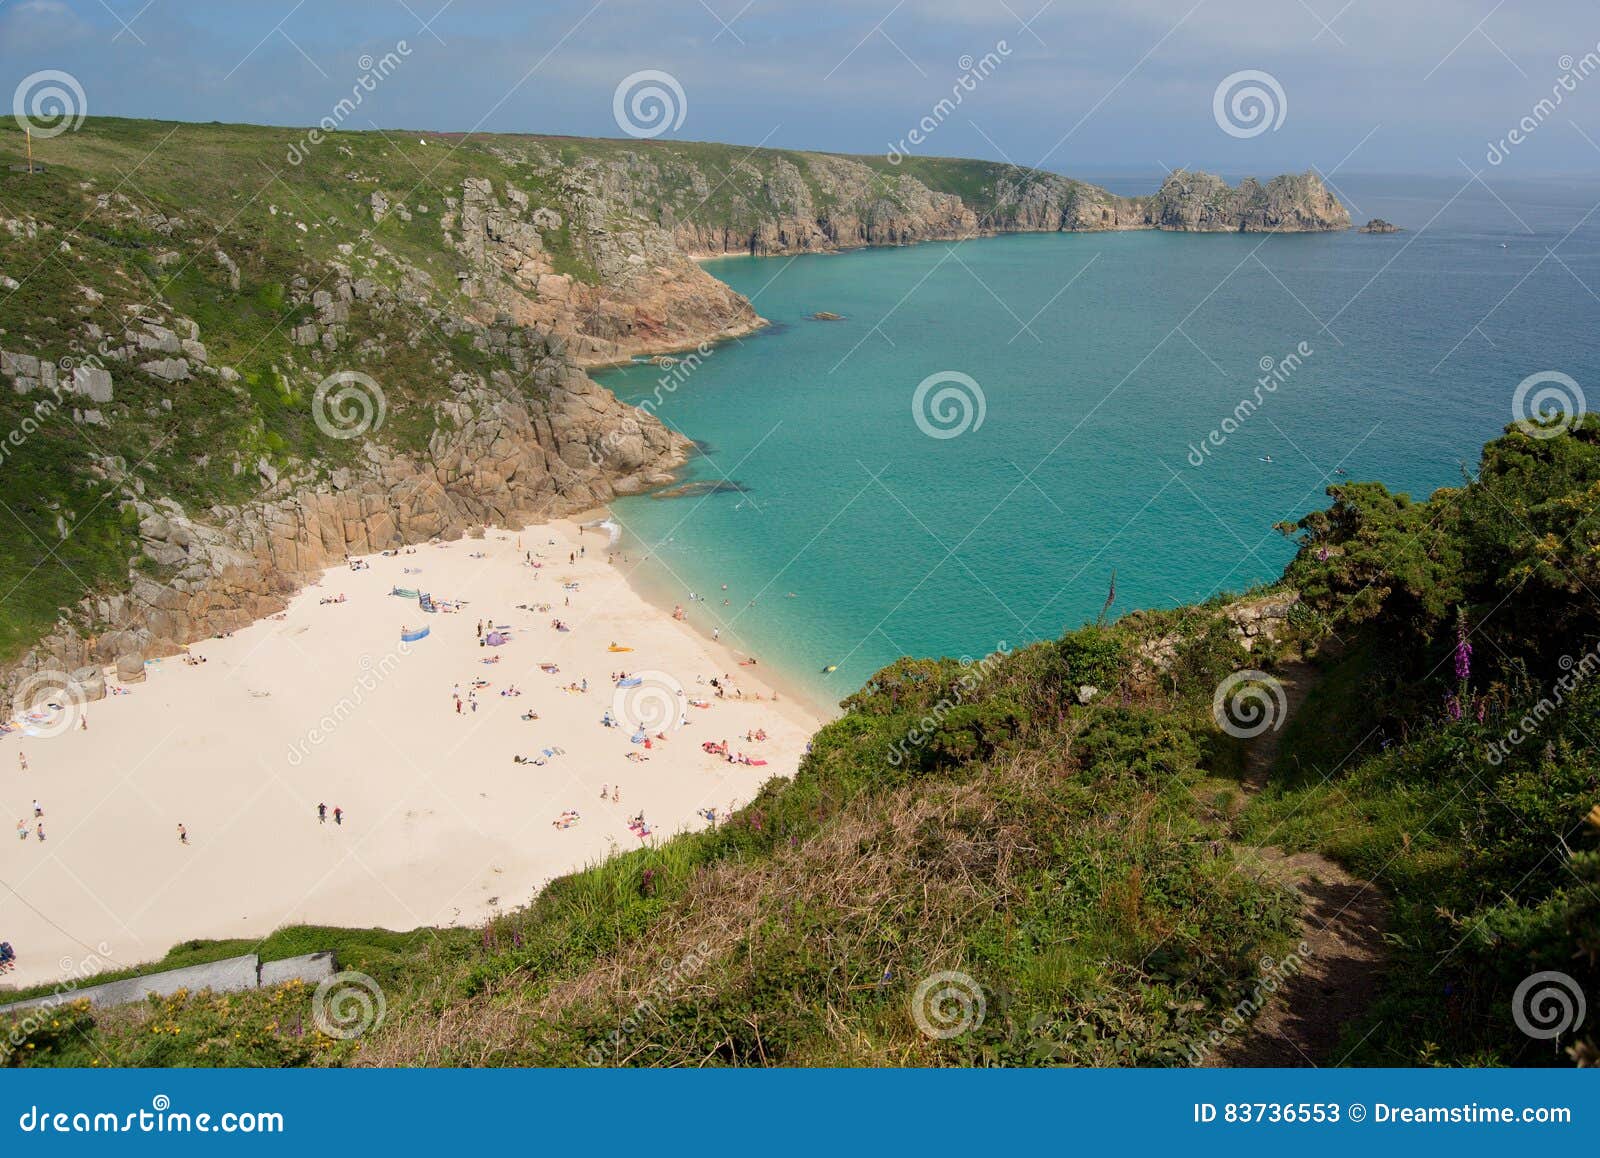 Porthucrno sandy beach and summer in the cornwall, UK. Porthcurno sandy beach with tourists, rocks of the coast in background, pure water of the celtic sea, view from the Minack Theatre, summer in the Cornwall, UK 6/2016